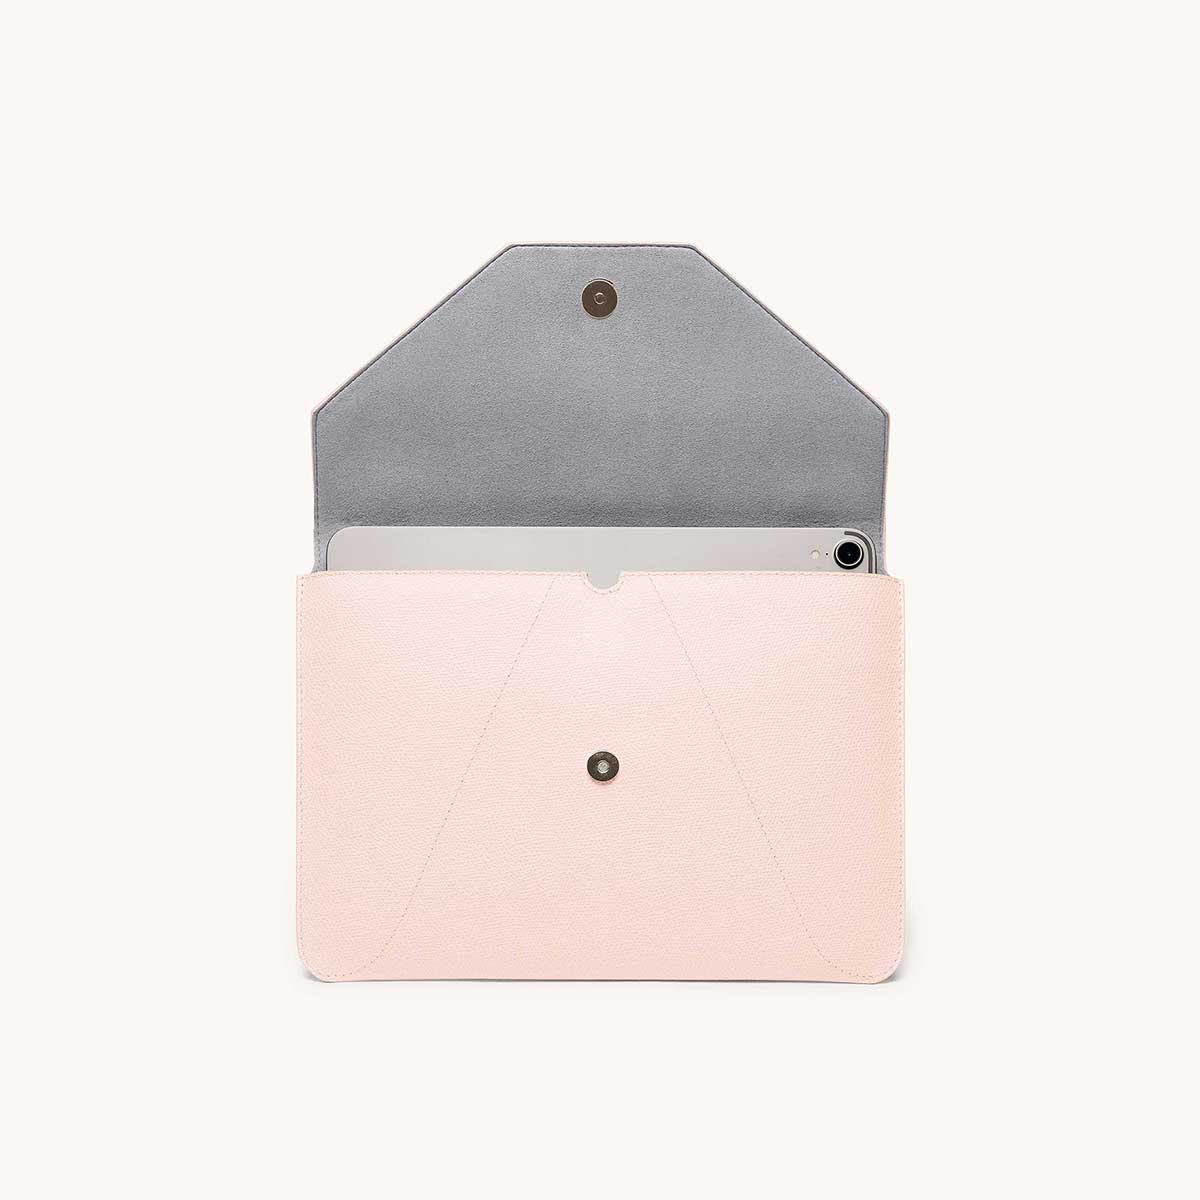 Mini envelope sleeve in blush front view with flap open.